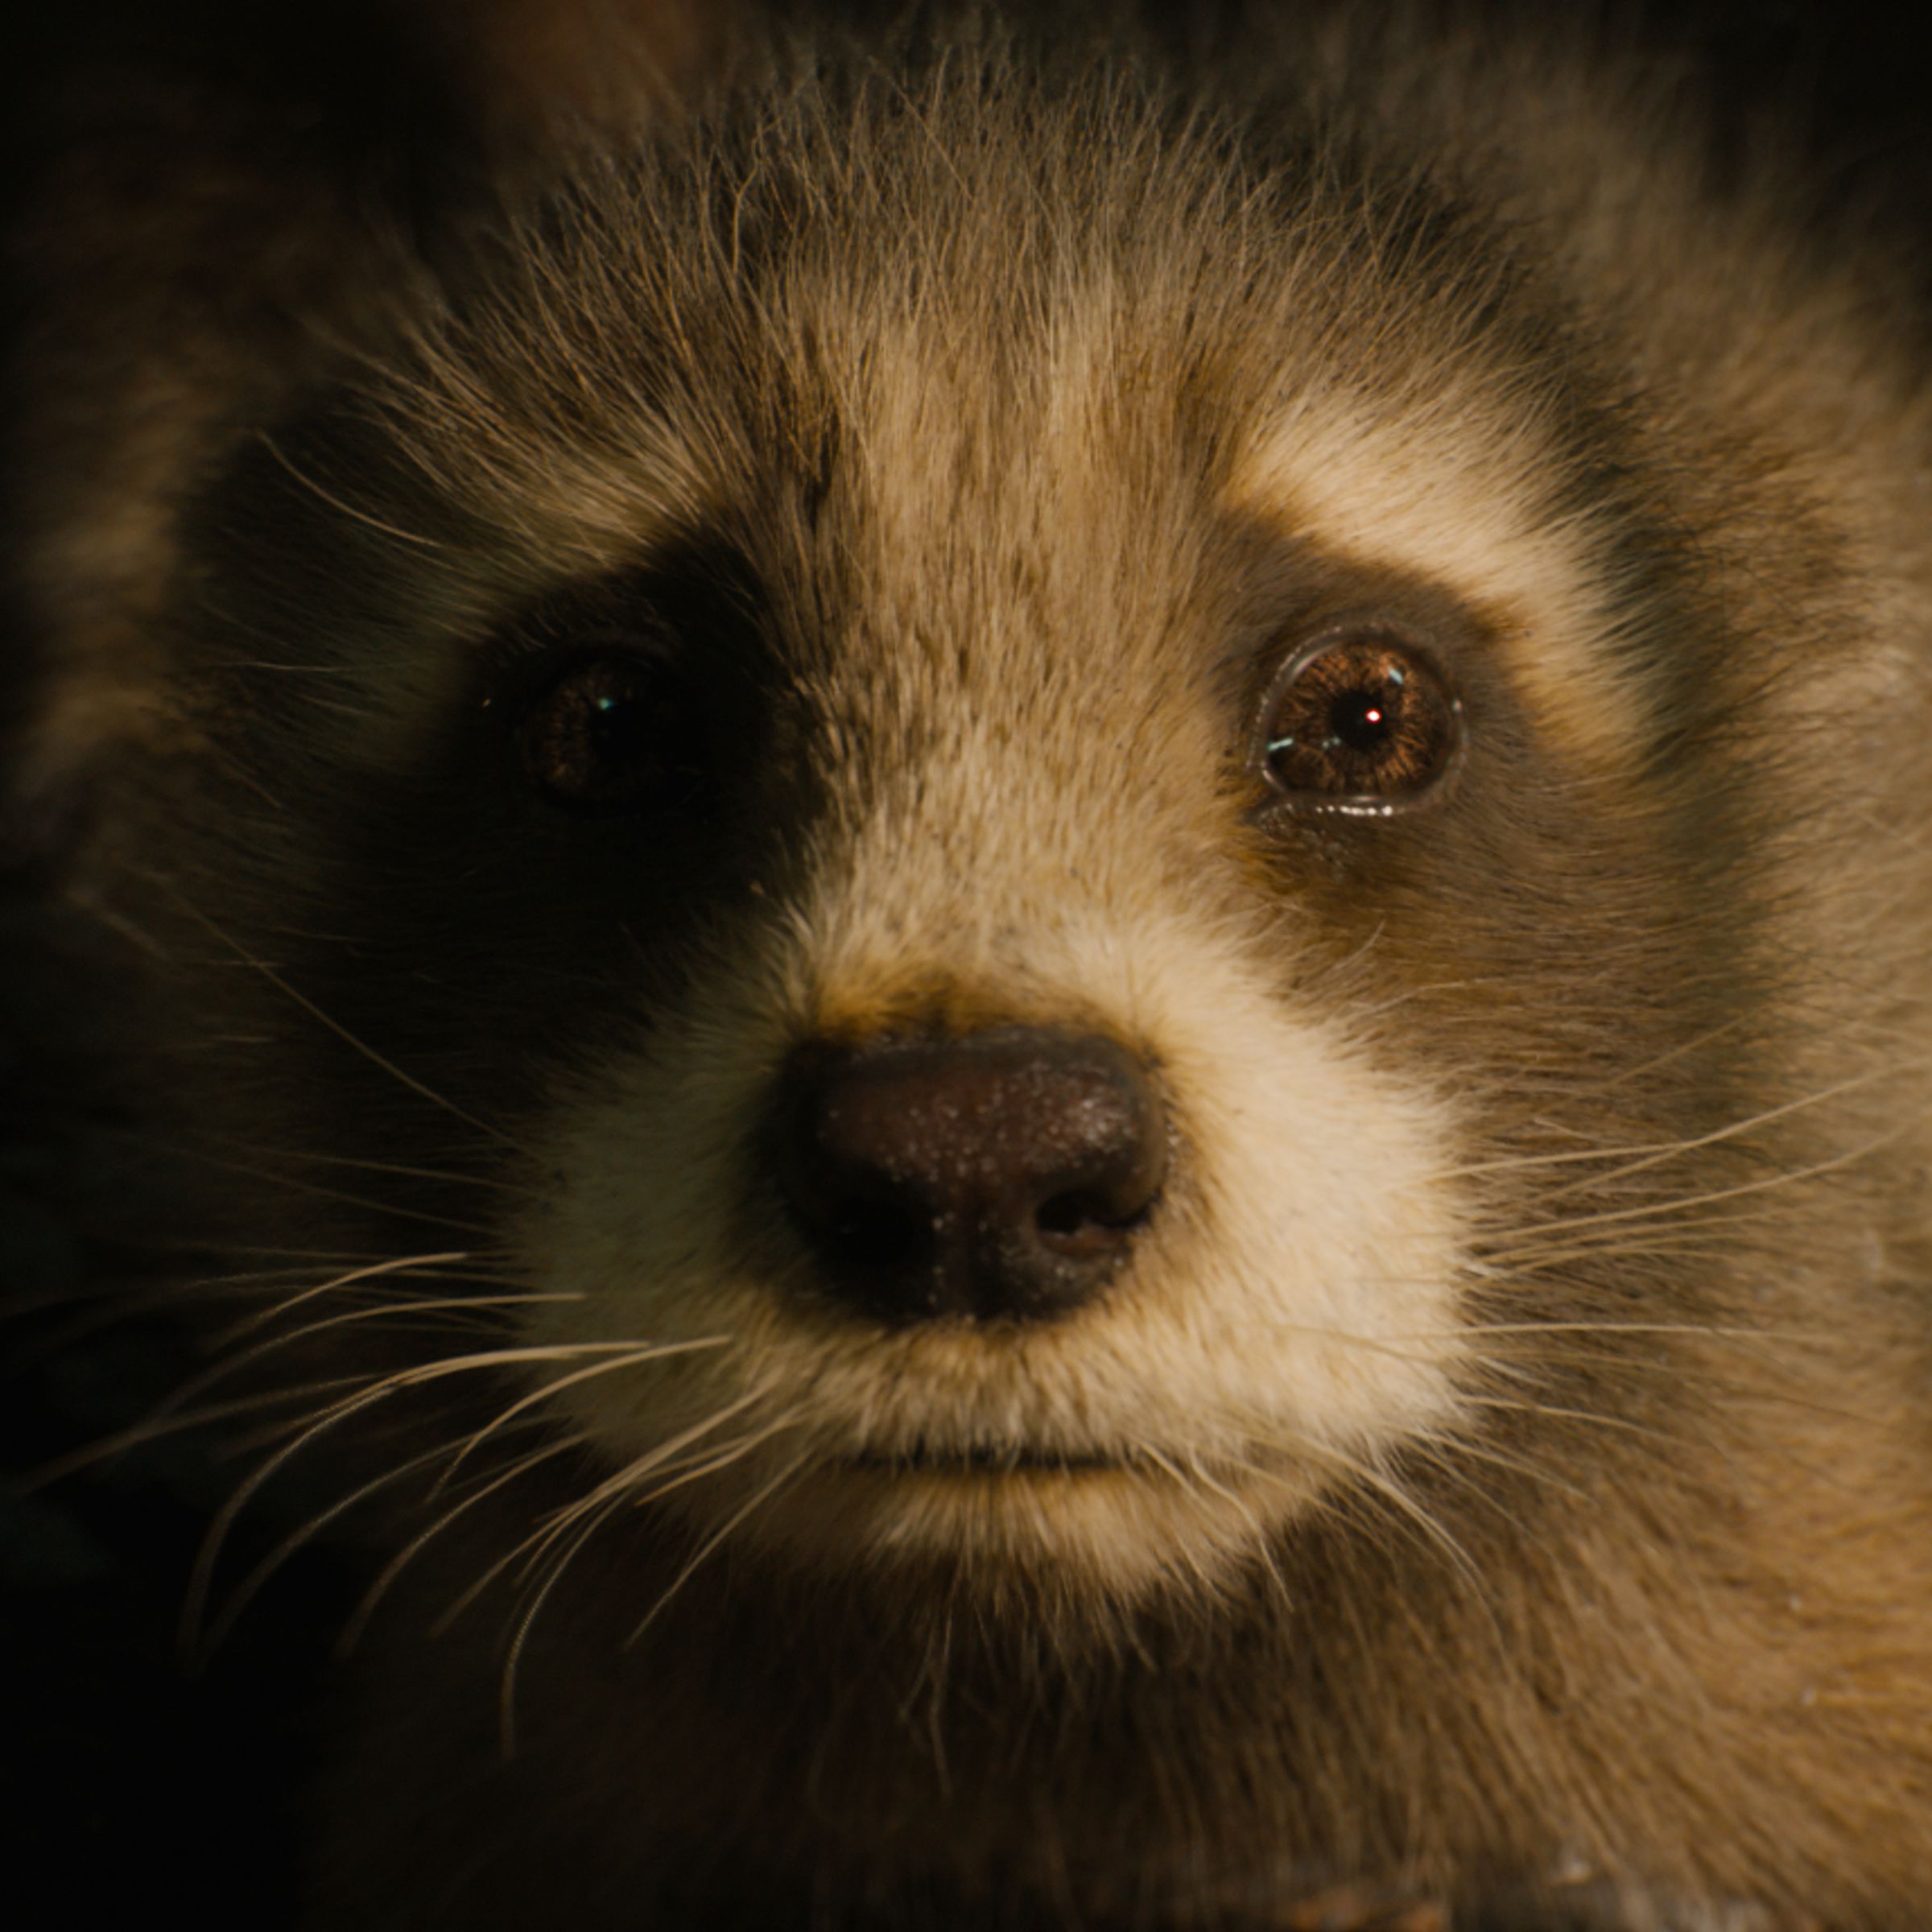 Baby Rocket (voiced by Bradley Cooper) in Marvel Studios’ Guardians of the Galaxy Vol. 3.